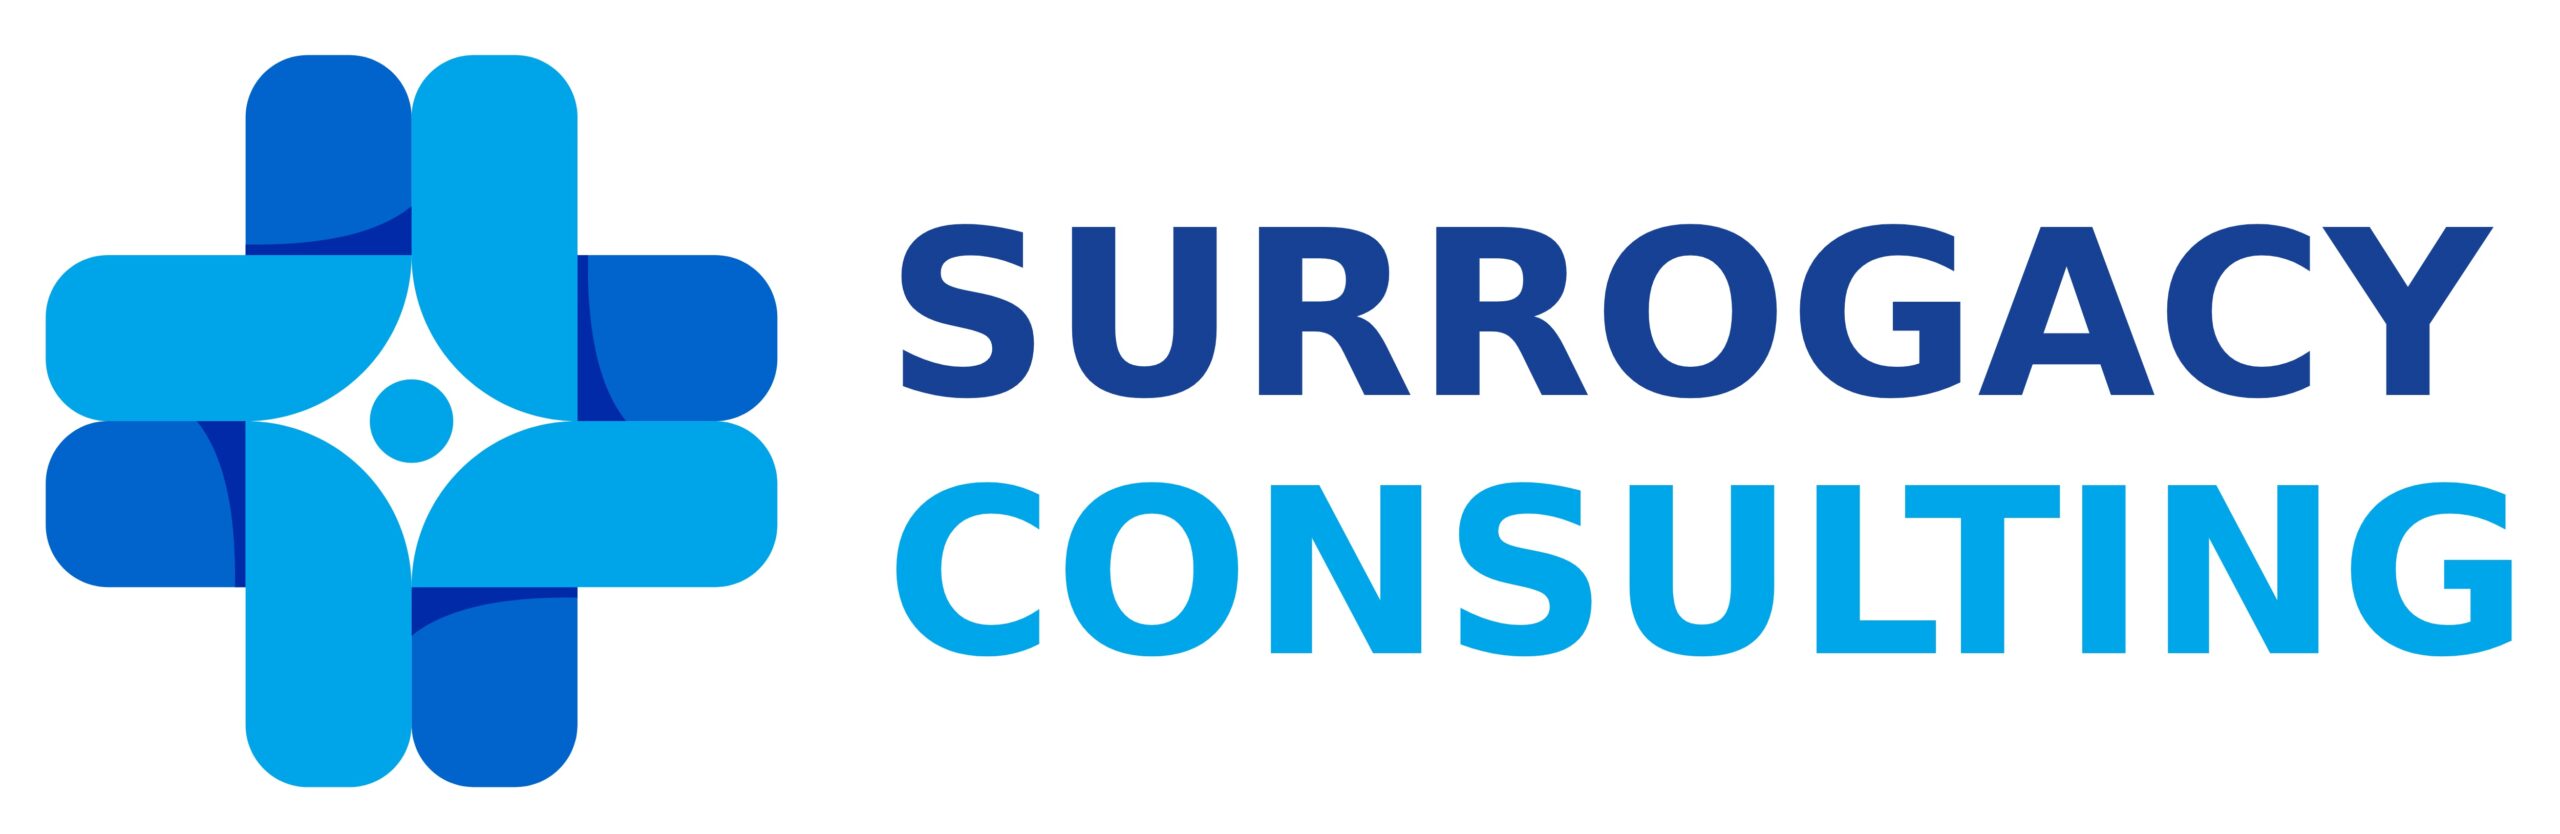 Surrogacy Consulting